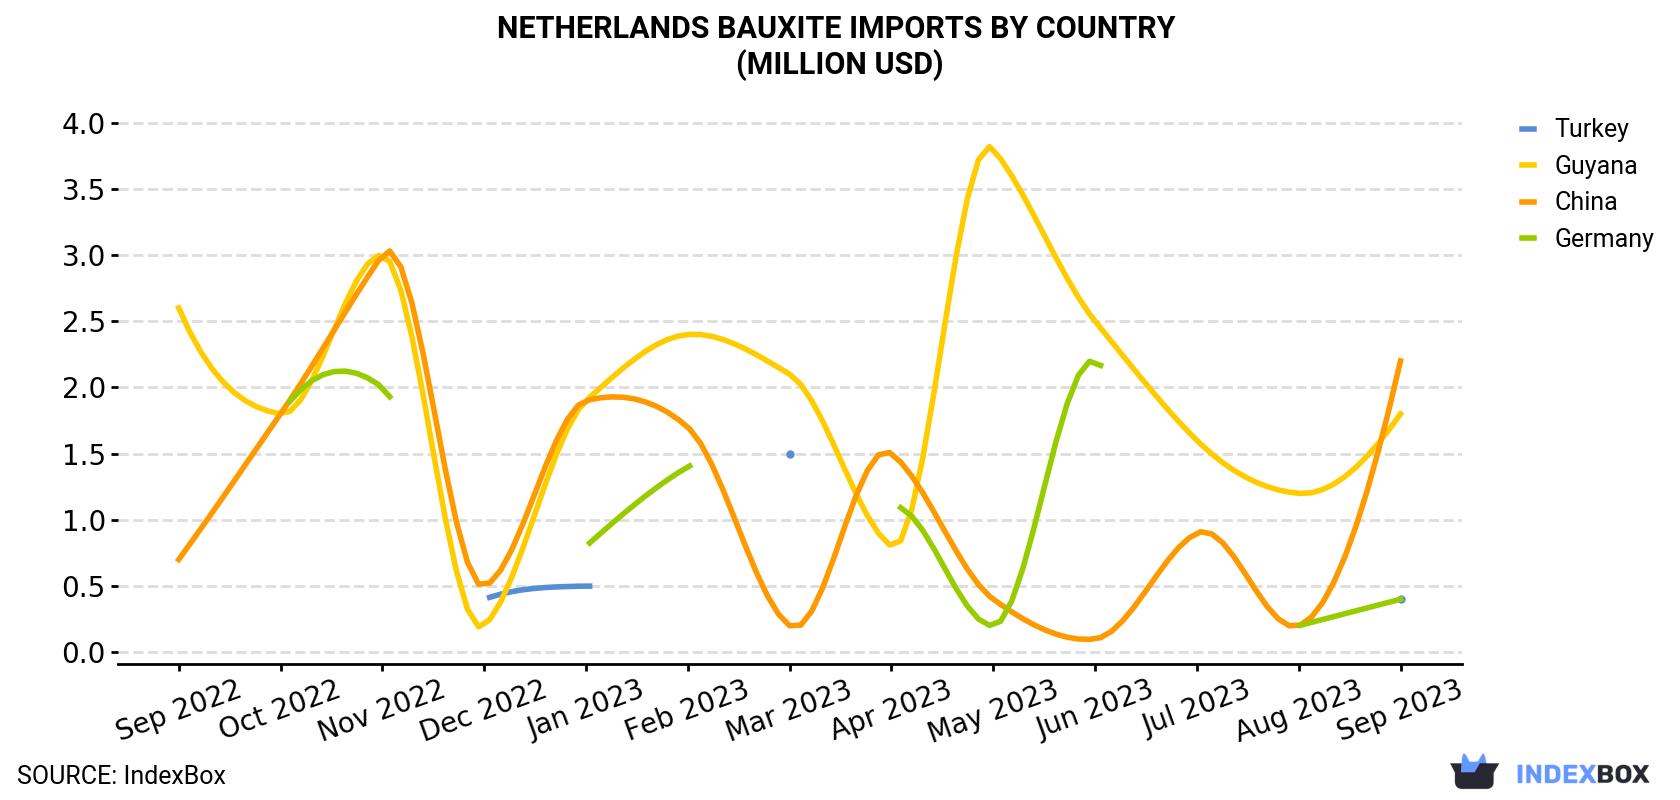 Netherlands Bauxite Imports By Country (Million USD)